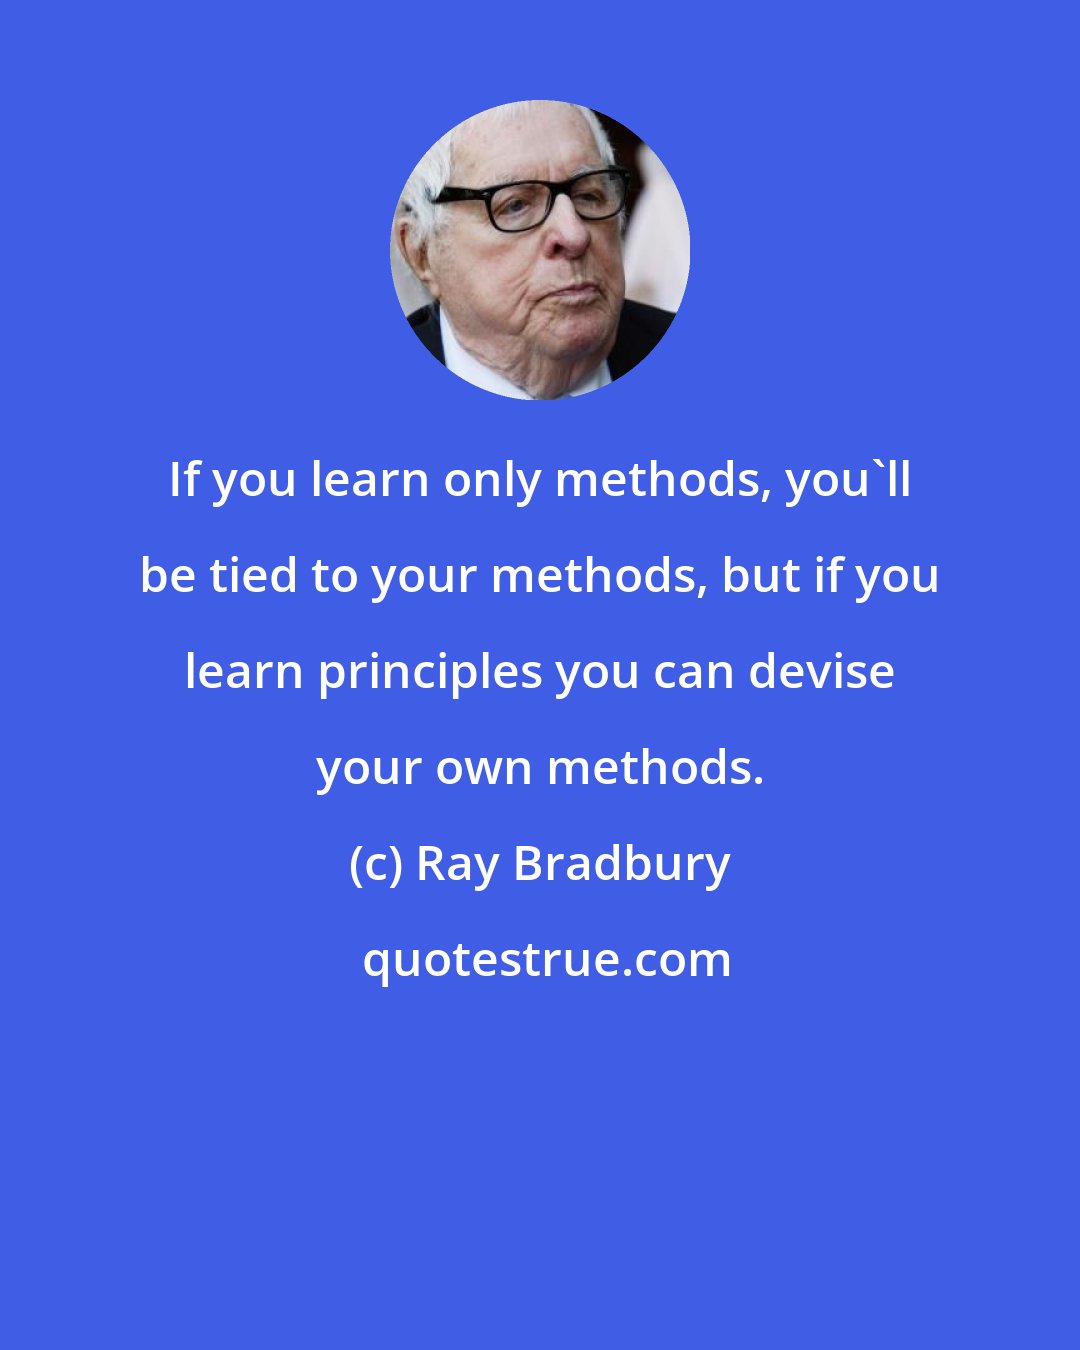 Ray Bradbury: If you learn only methods, you'll be tied to your methods, but if you learn principles you can devise your own methods.